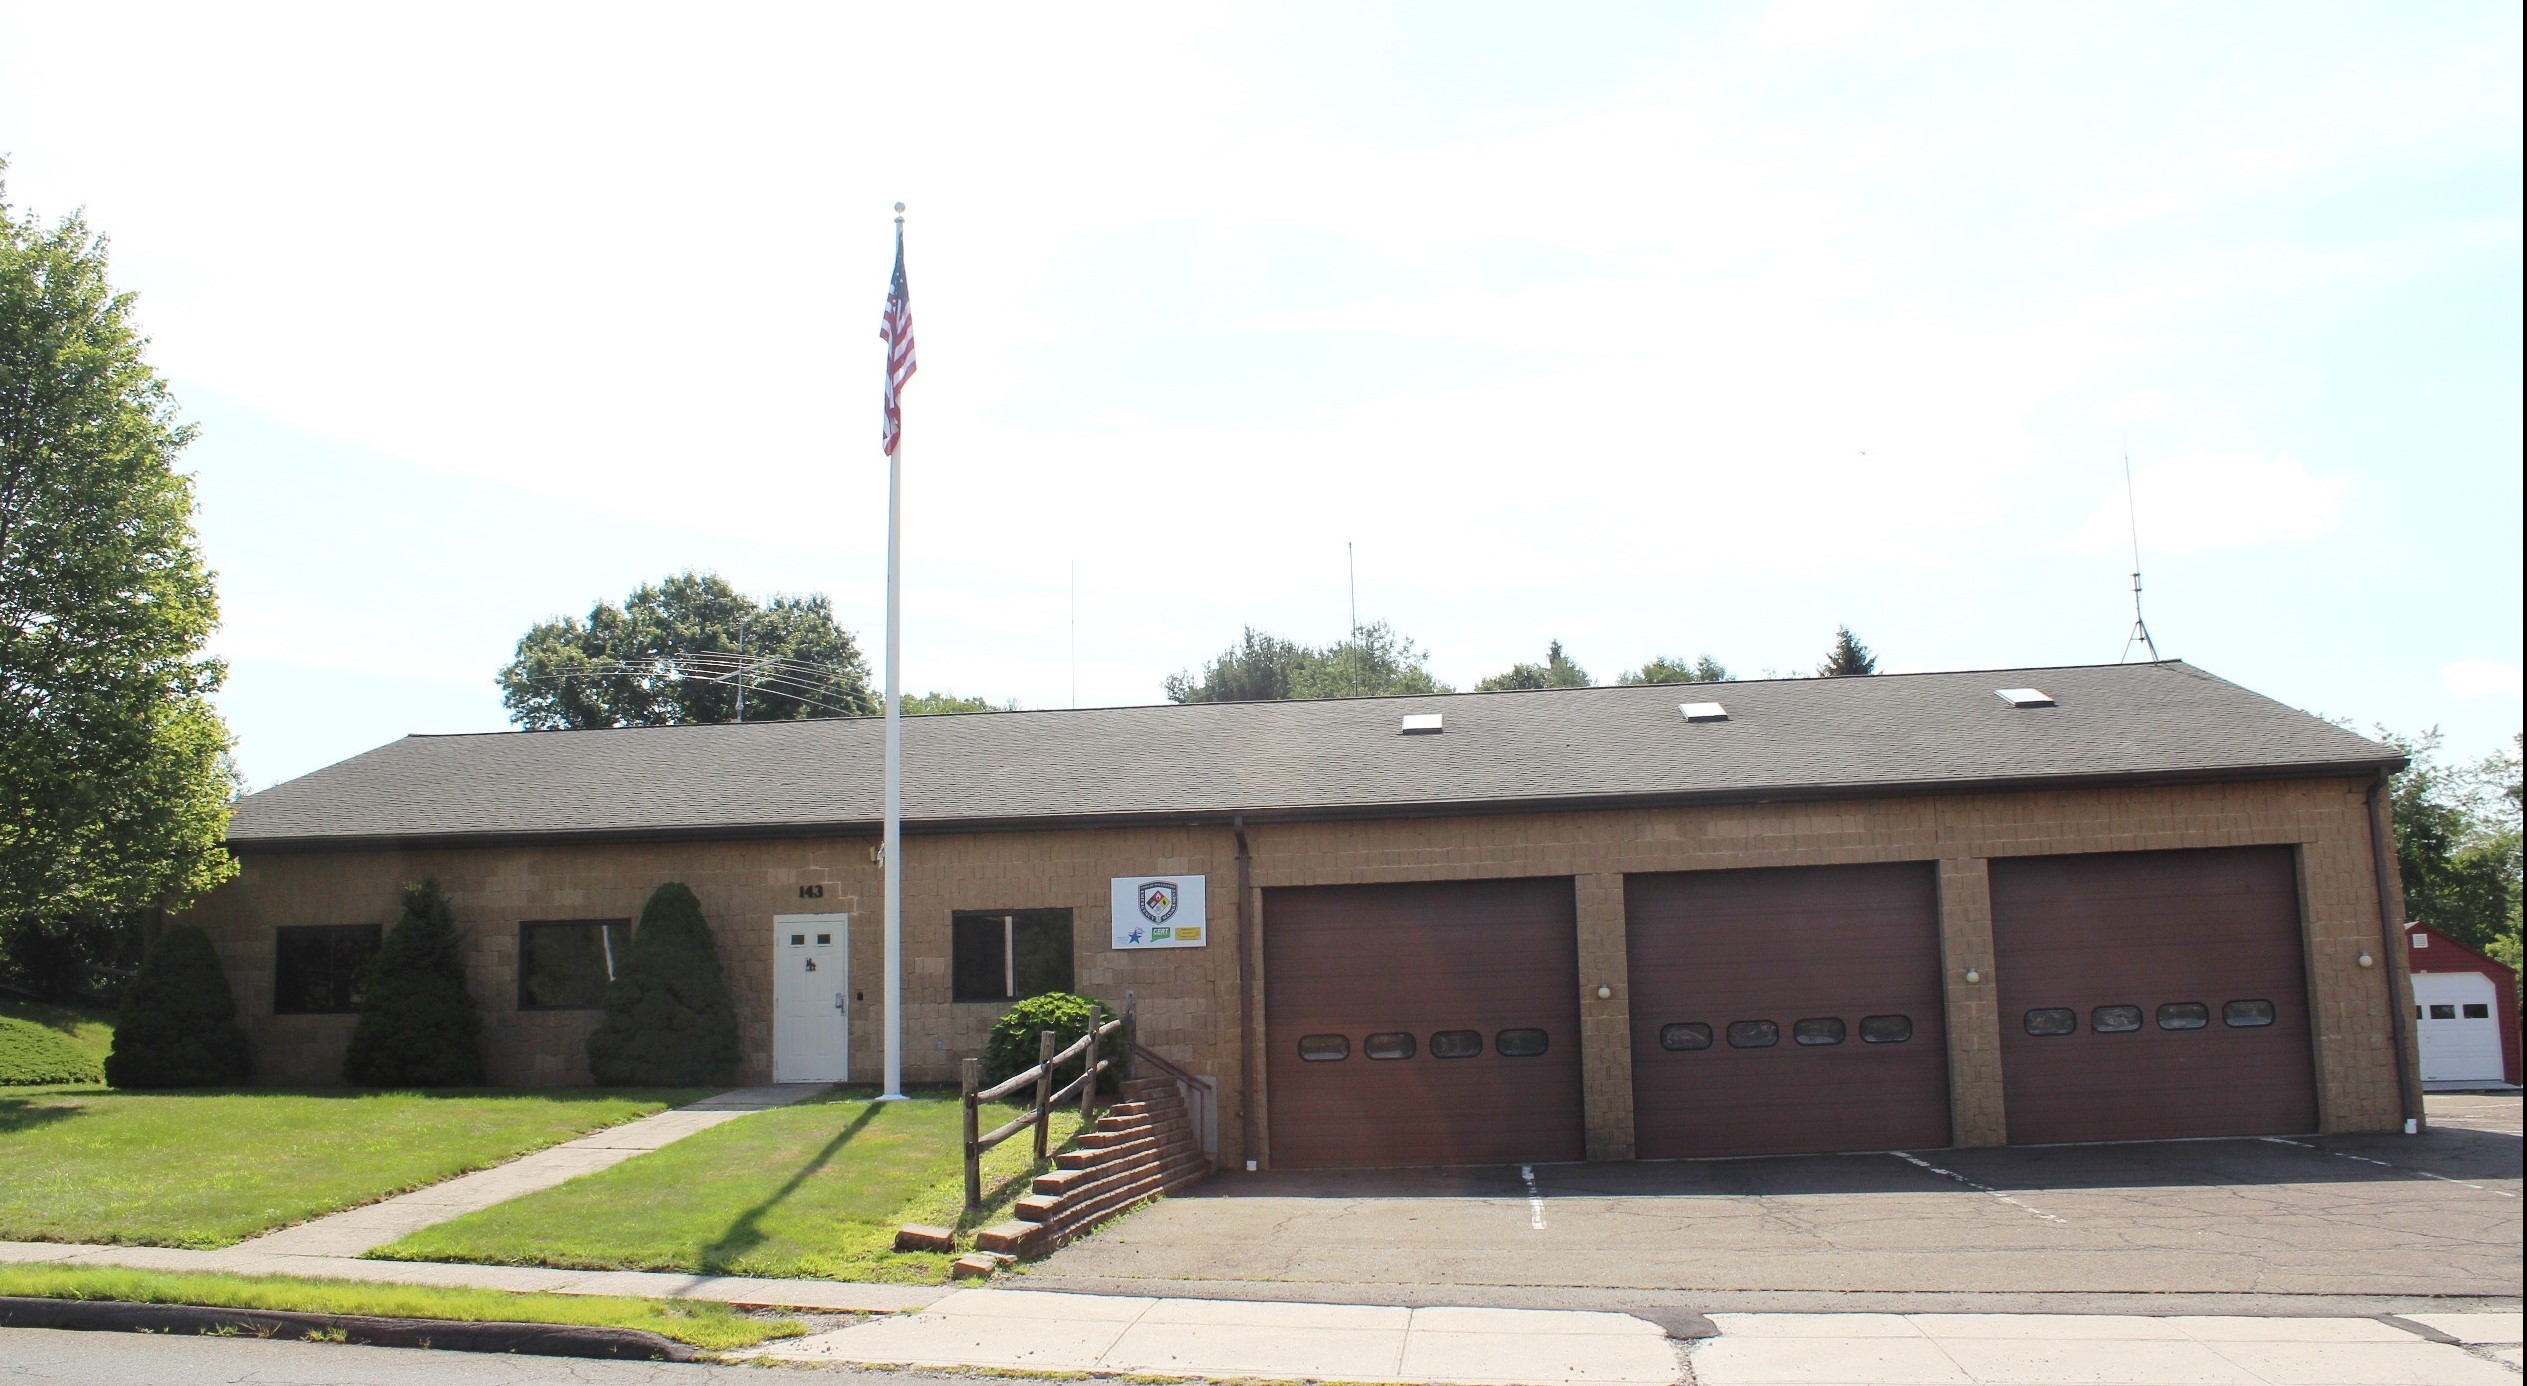 Front of the firehouse with a flagpole and two firetruck bays.